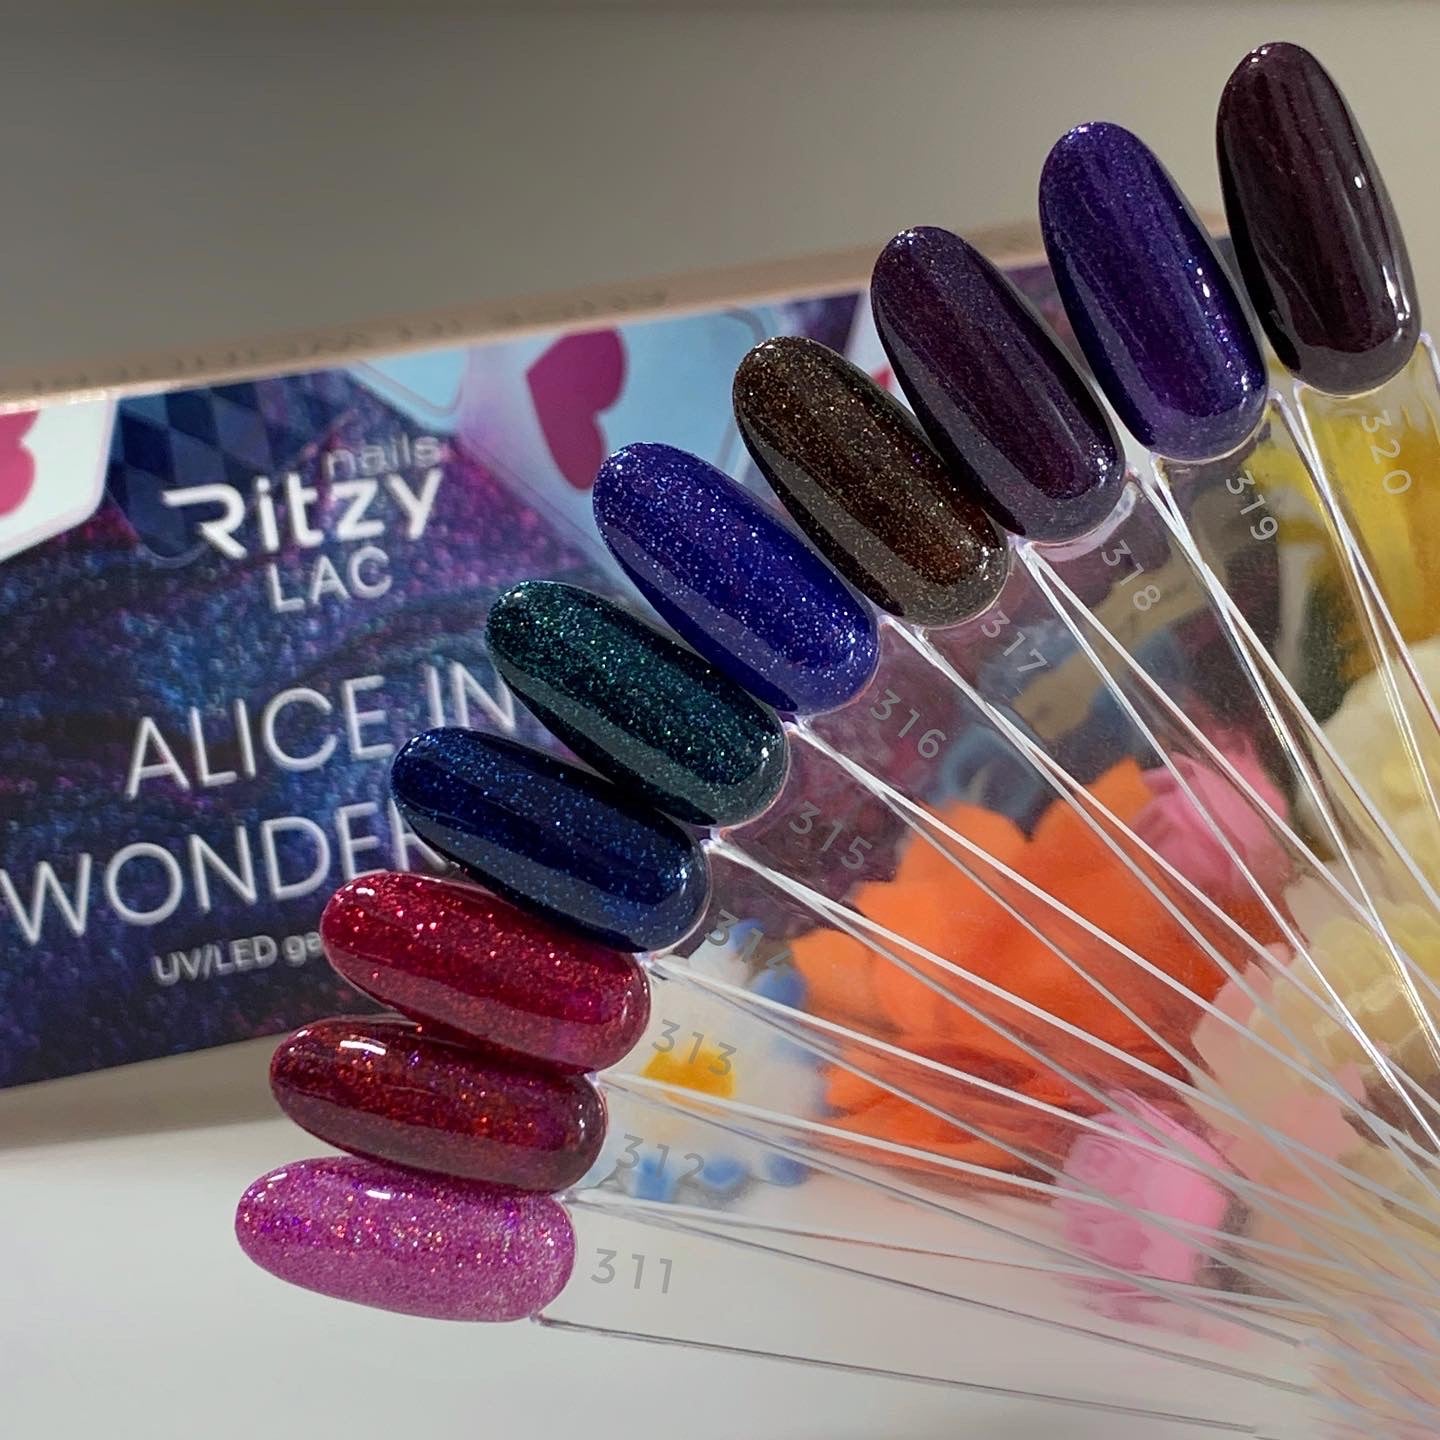 Ritzy Nails “Alice in Wonderland"collection of 10x 9ml colors.